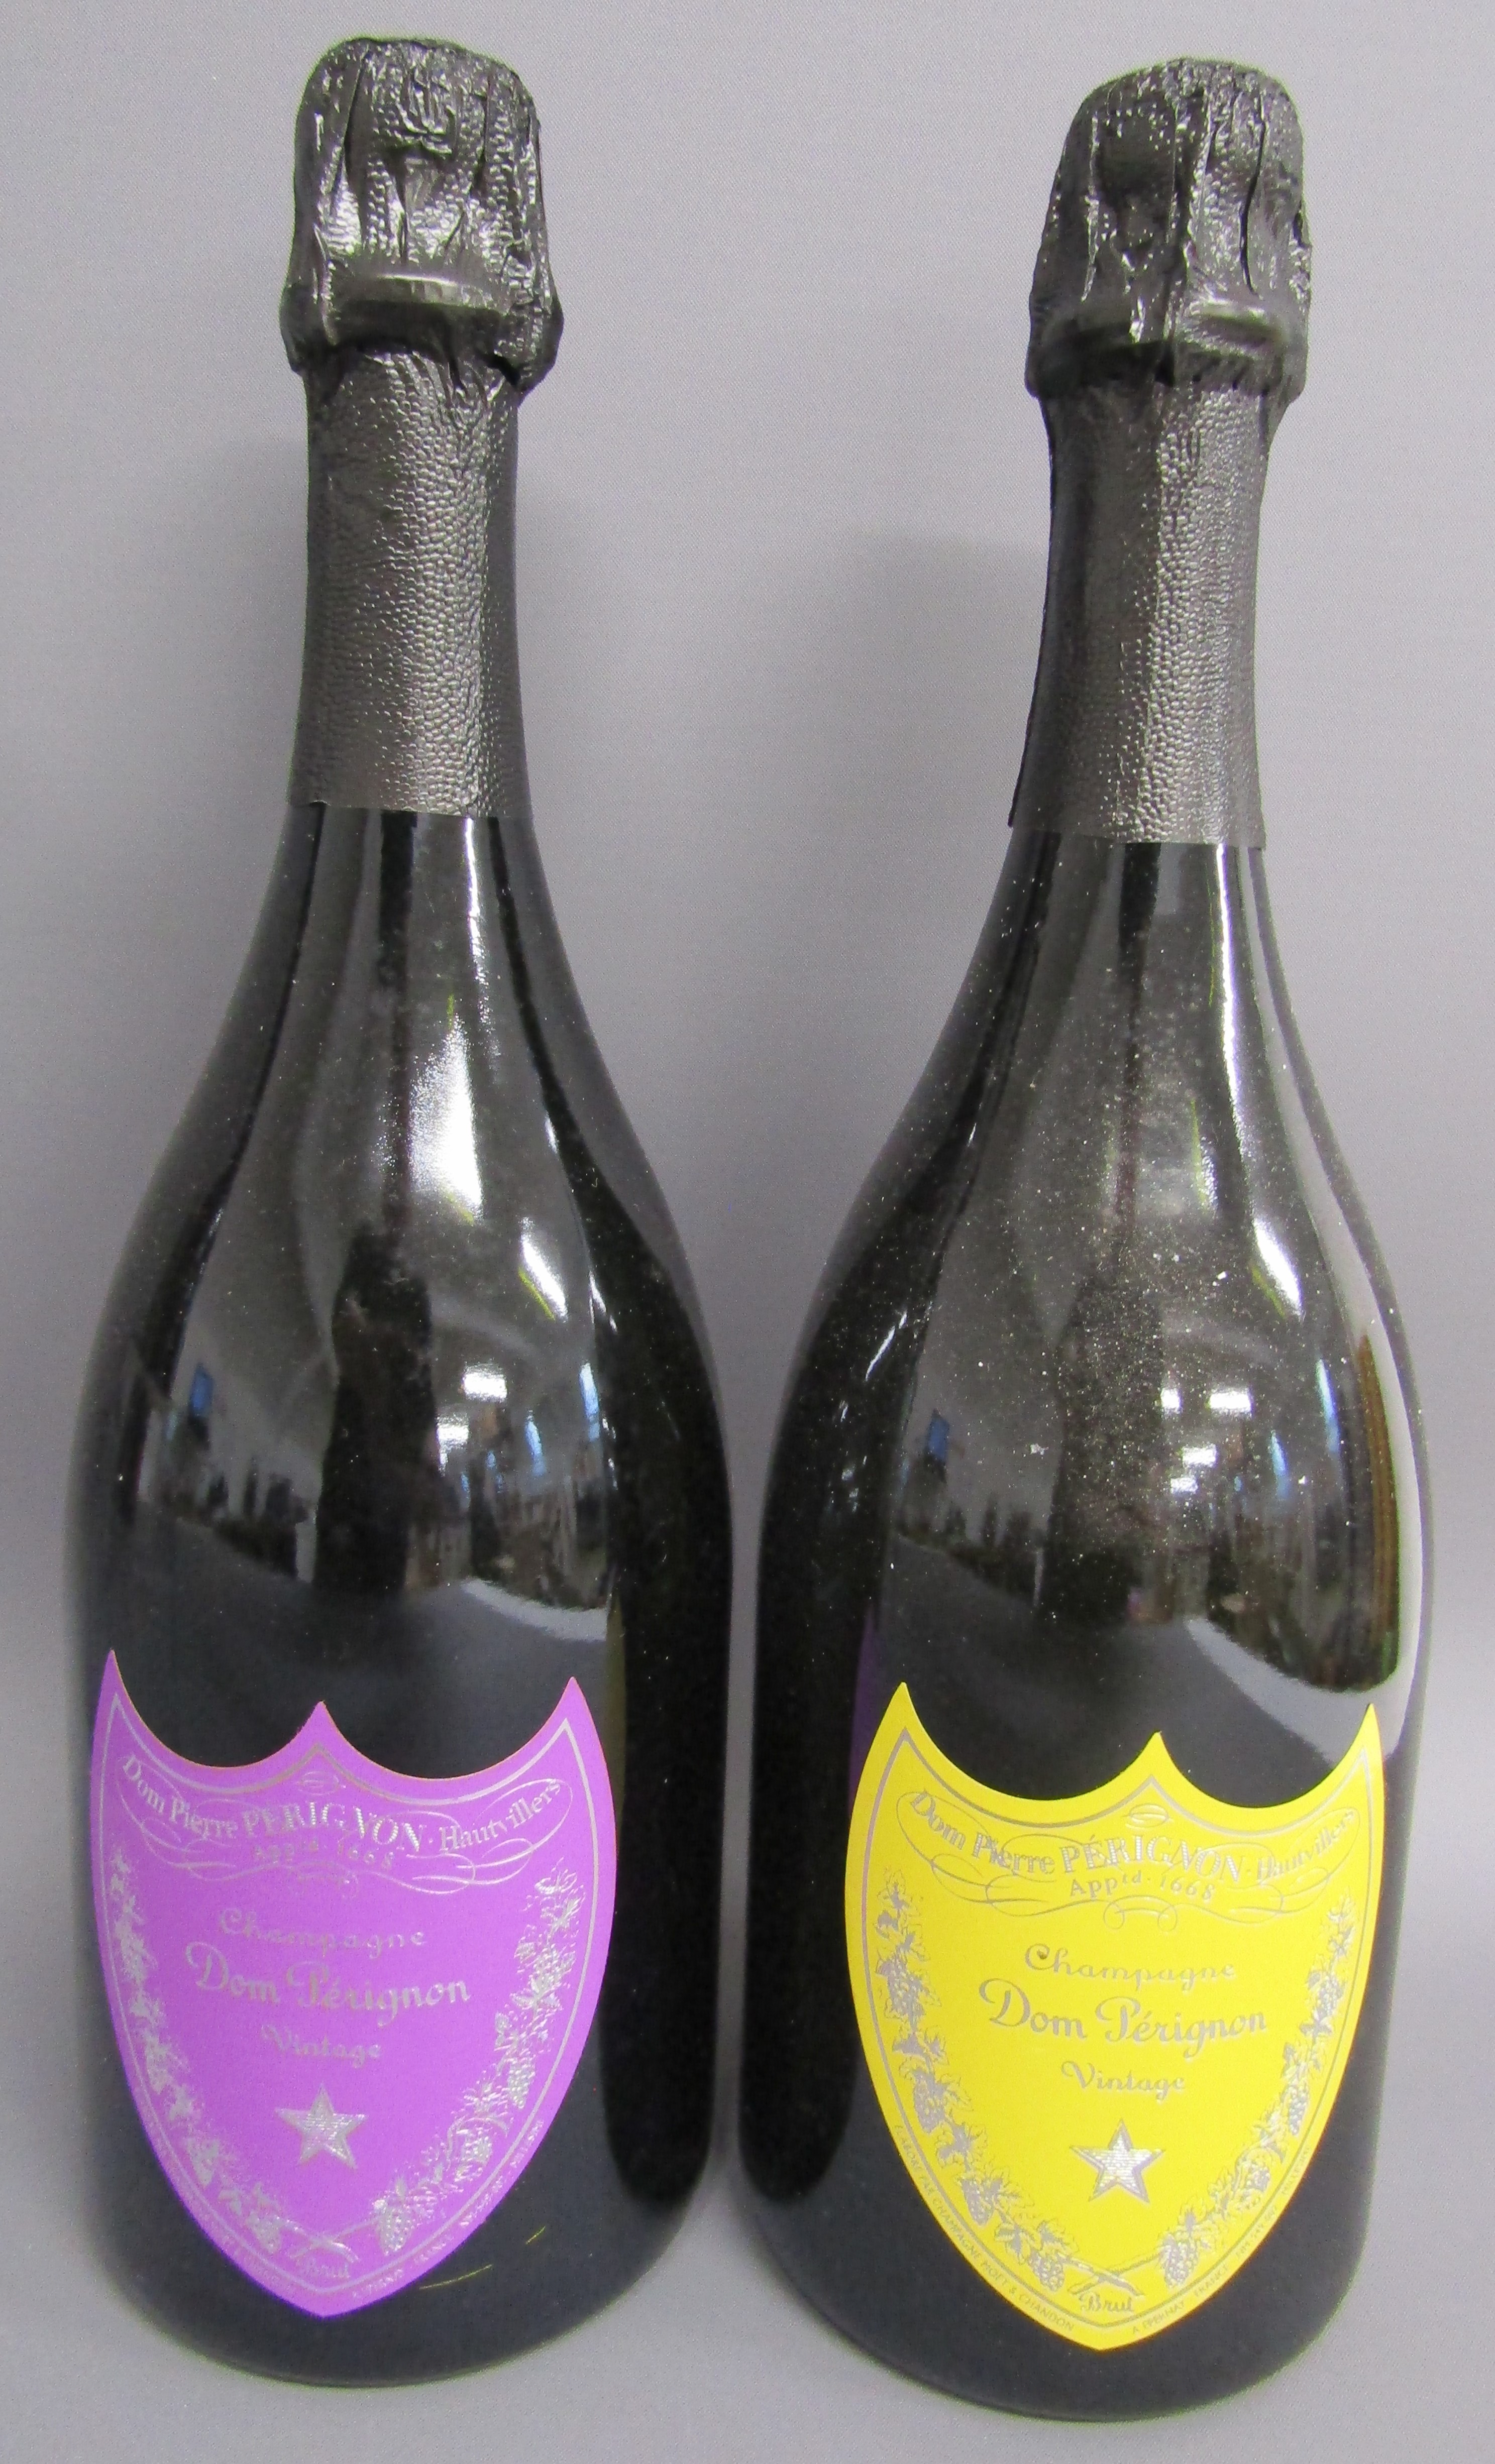 Set of 6 Andy Warhol Tribute Collection Dom Perignon display bottles (empty) - Image 3 of 6